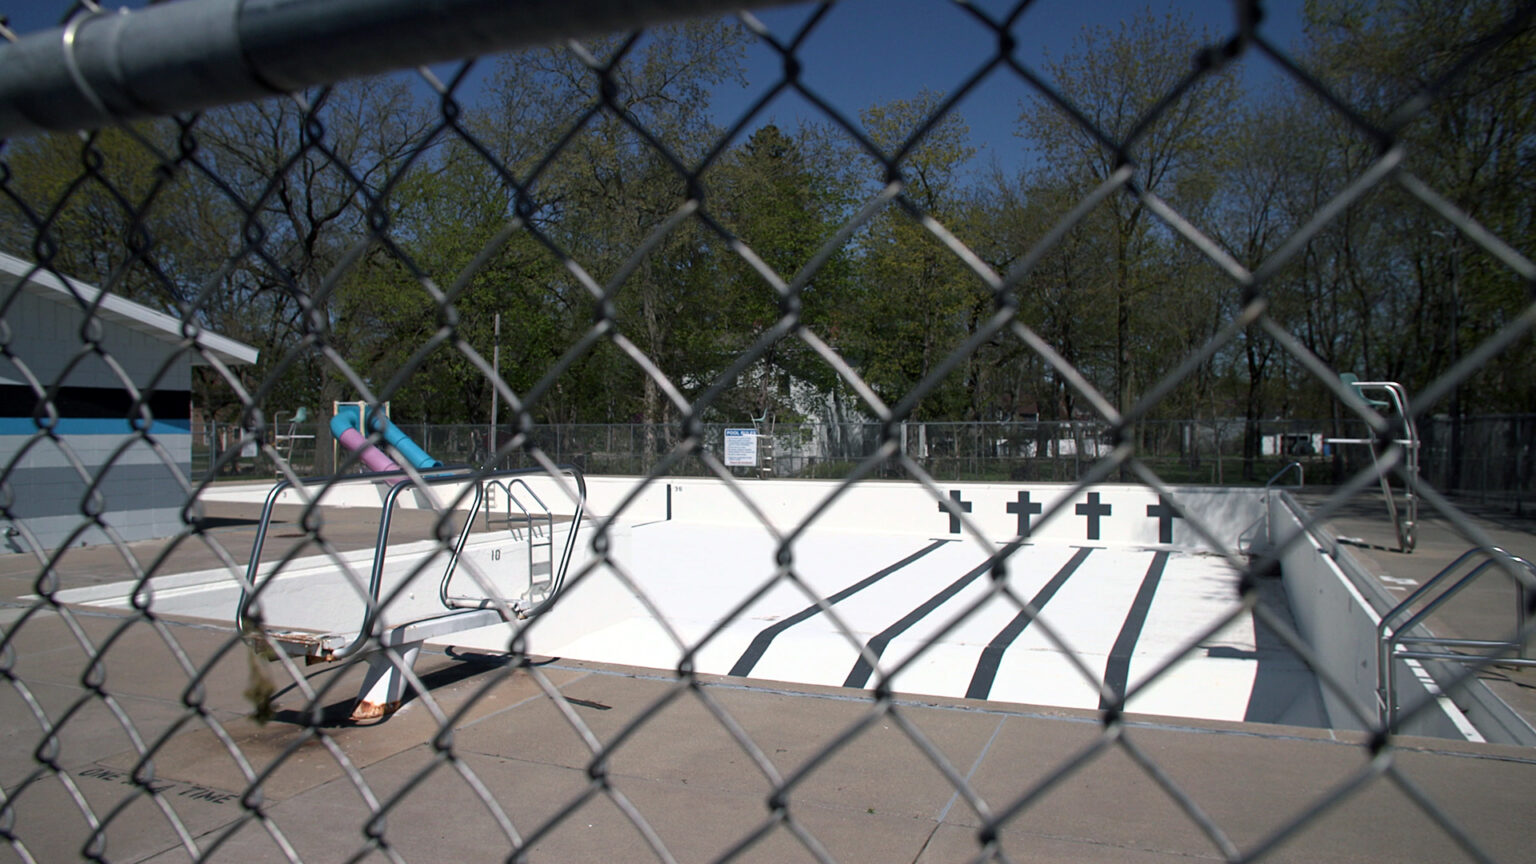 An empty pool with multiple swim lanes, a deeper diving area, and a shallower play area with two water slides sits empty, as seen through a chain-link fence, with buildings and trees in the background.